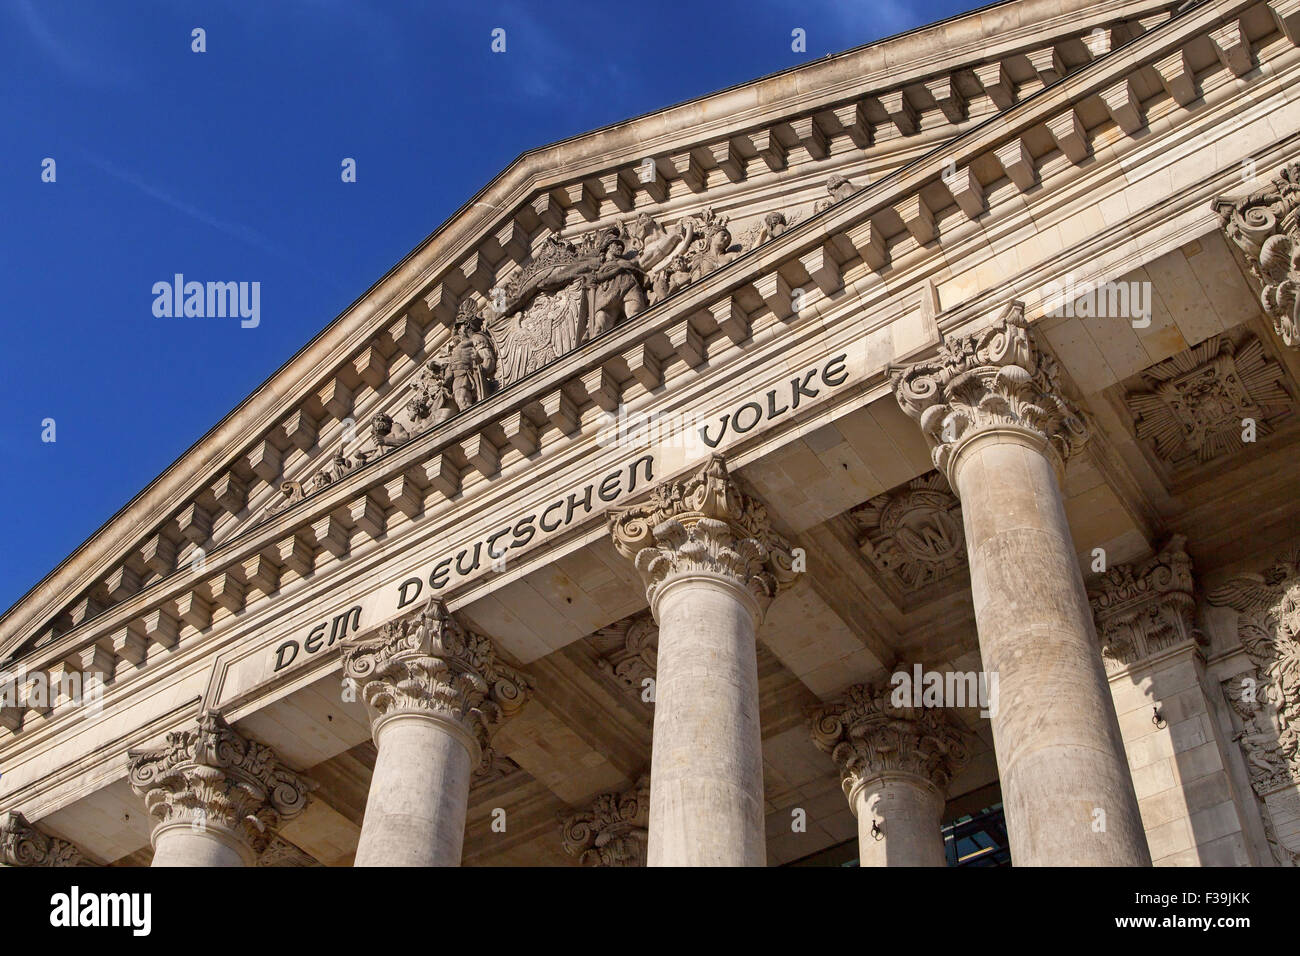 Tympanum of the Reichstag building in Berlin, Germany. Stock Photo